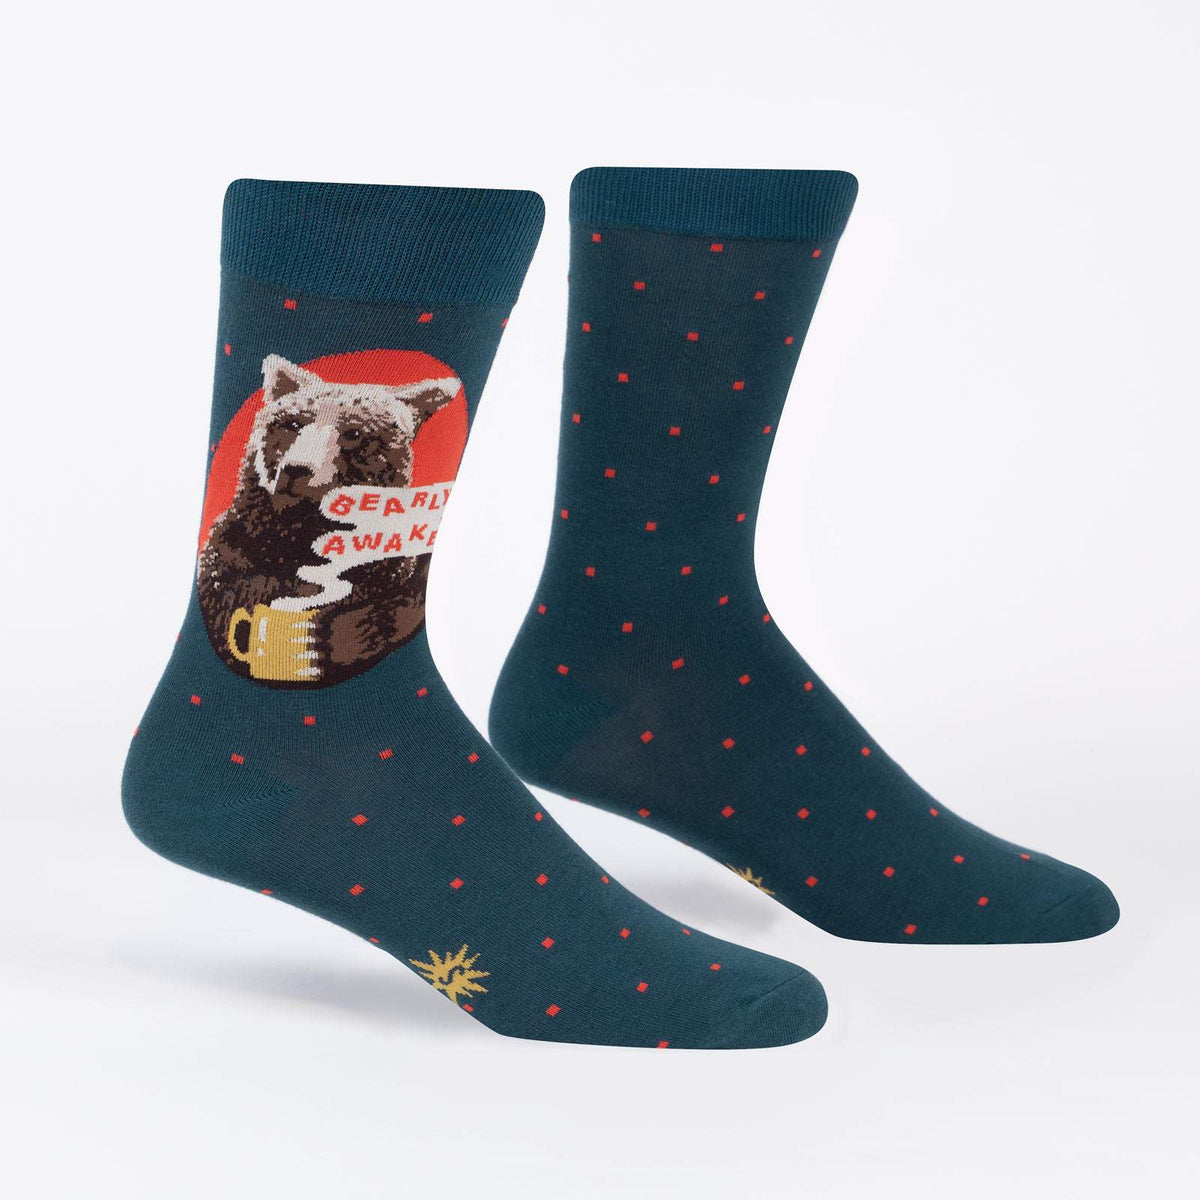 Sock It To Me Bearly Awake women&#39;s and men&#39;s crew sock featuring blue sock with small red polka dots and picture of bear holding a cup of coffee and the saying &quot;bearly awake&quot;. Socks shown on display feet. 